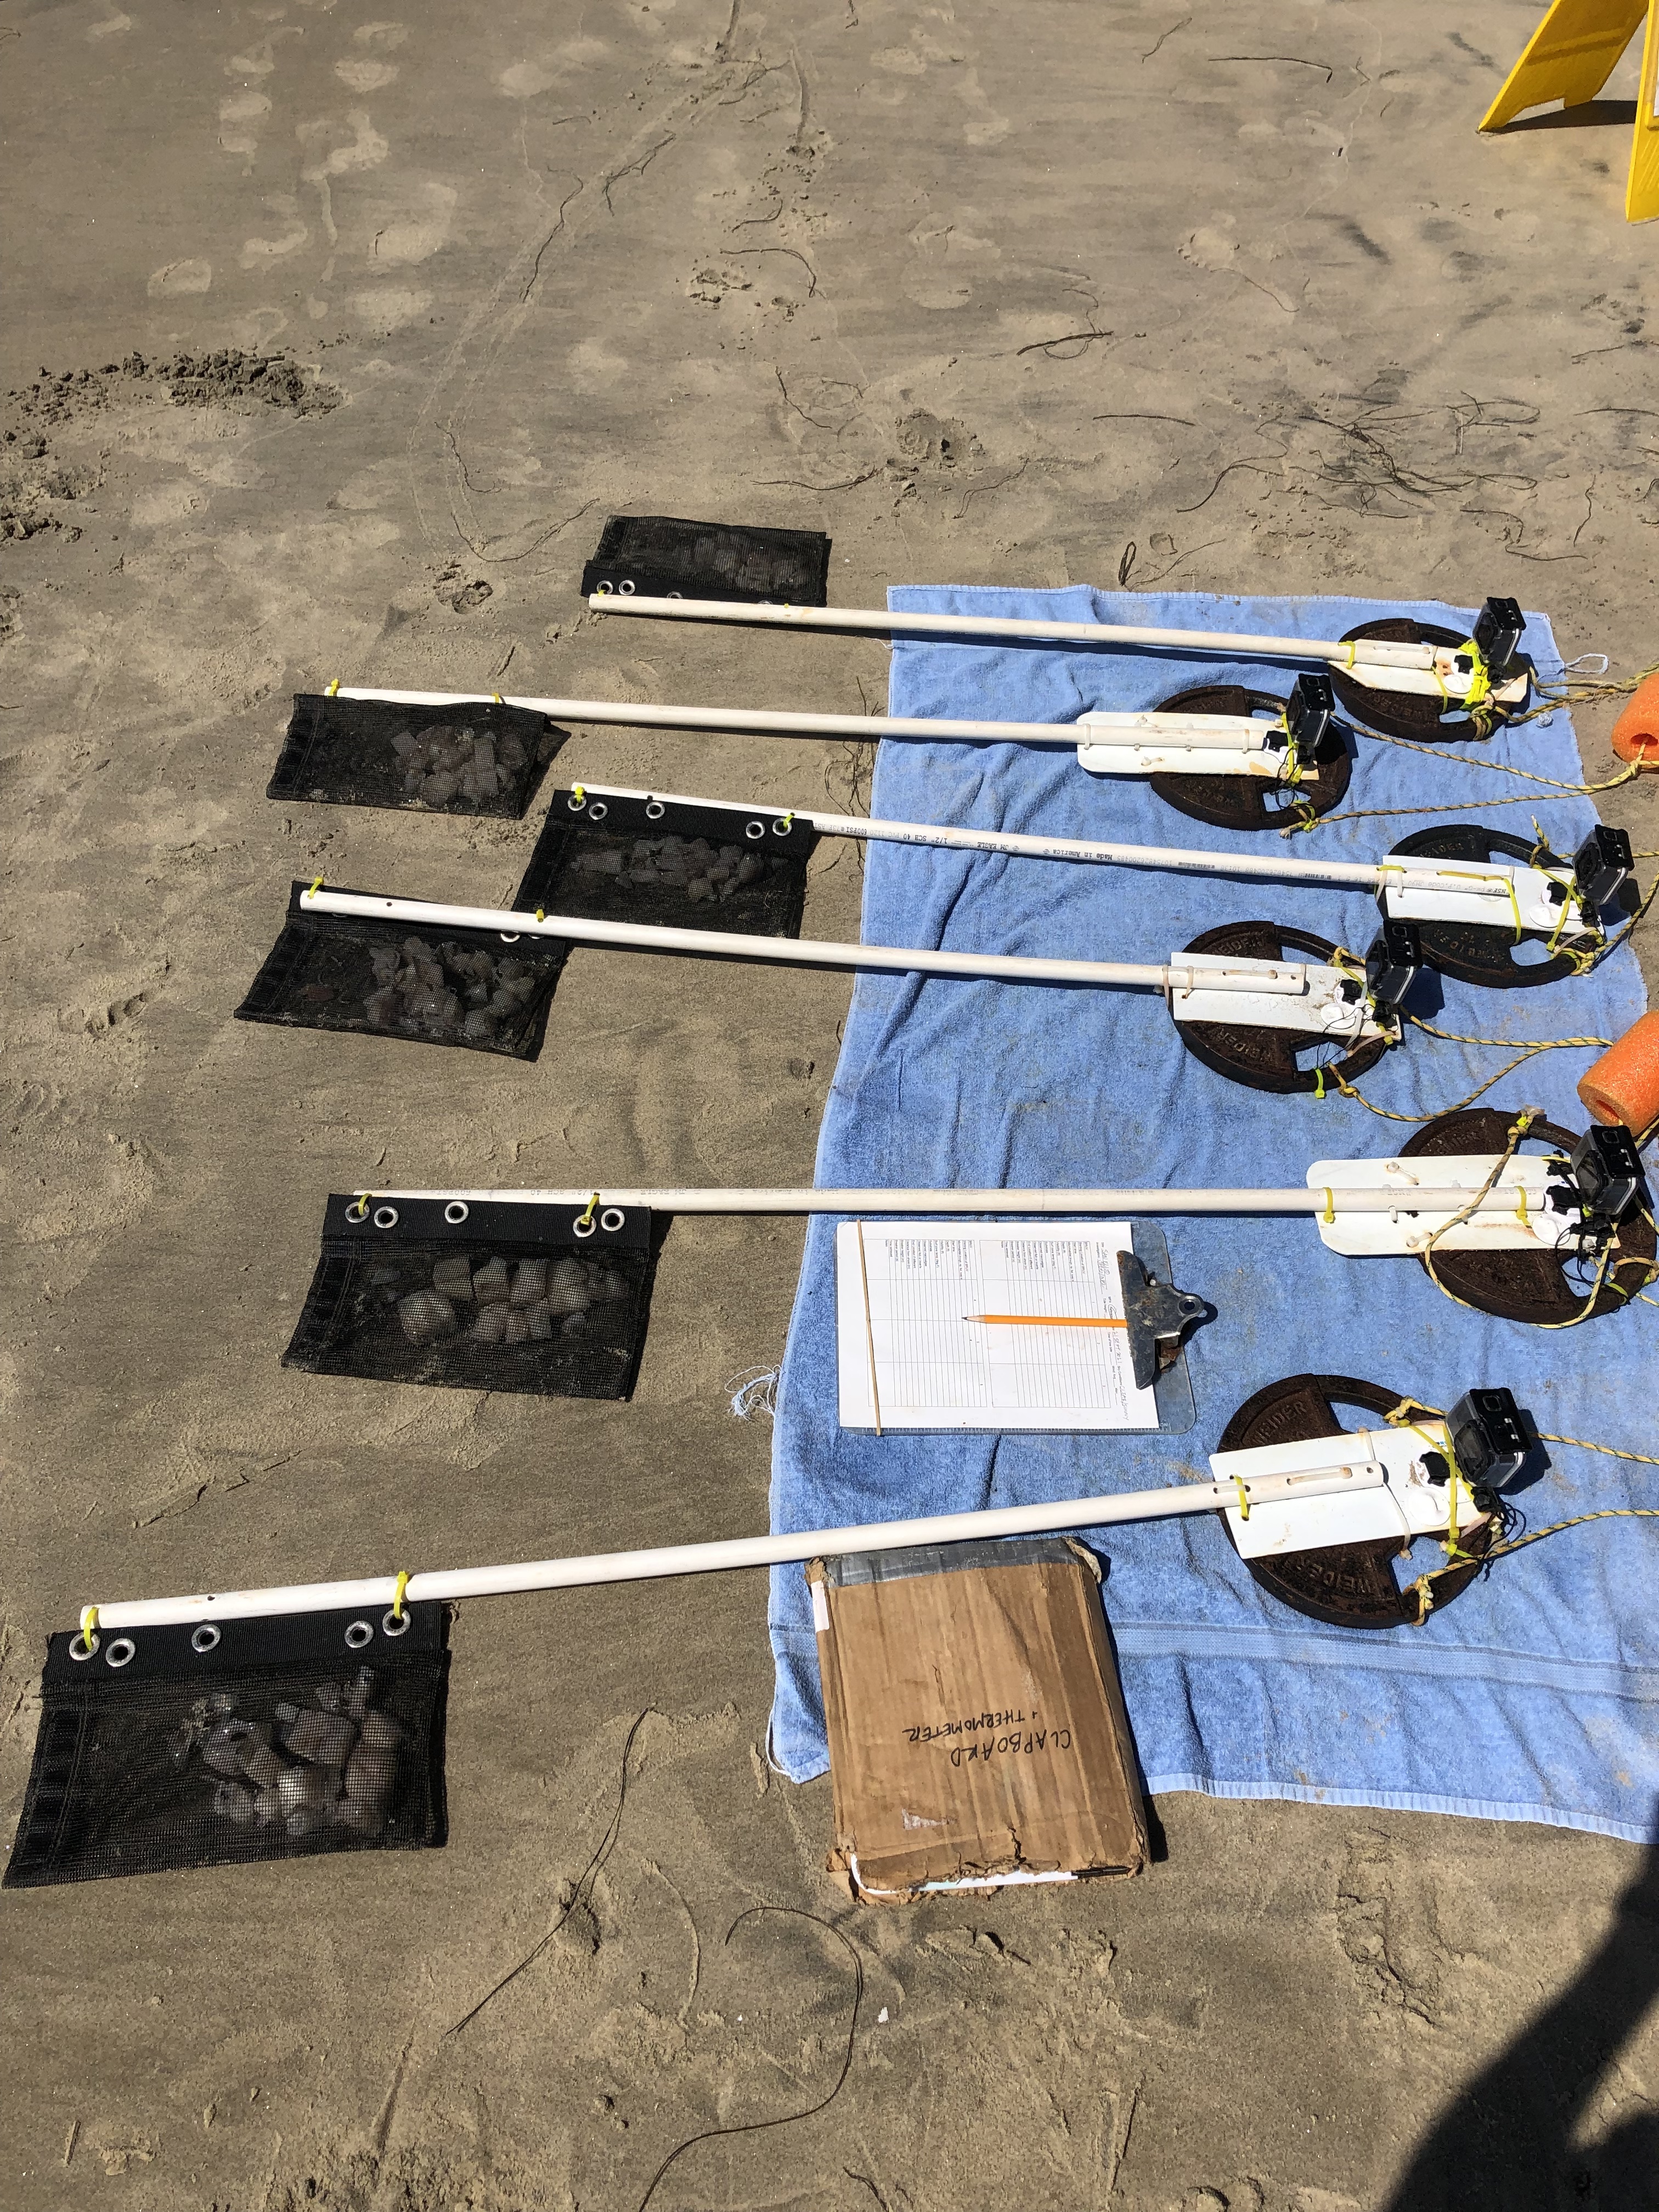 Tools and equipment used in the beach survey.